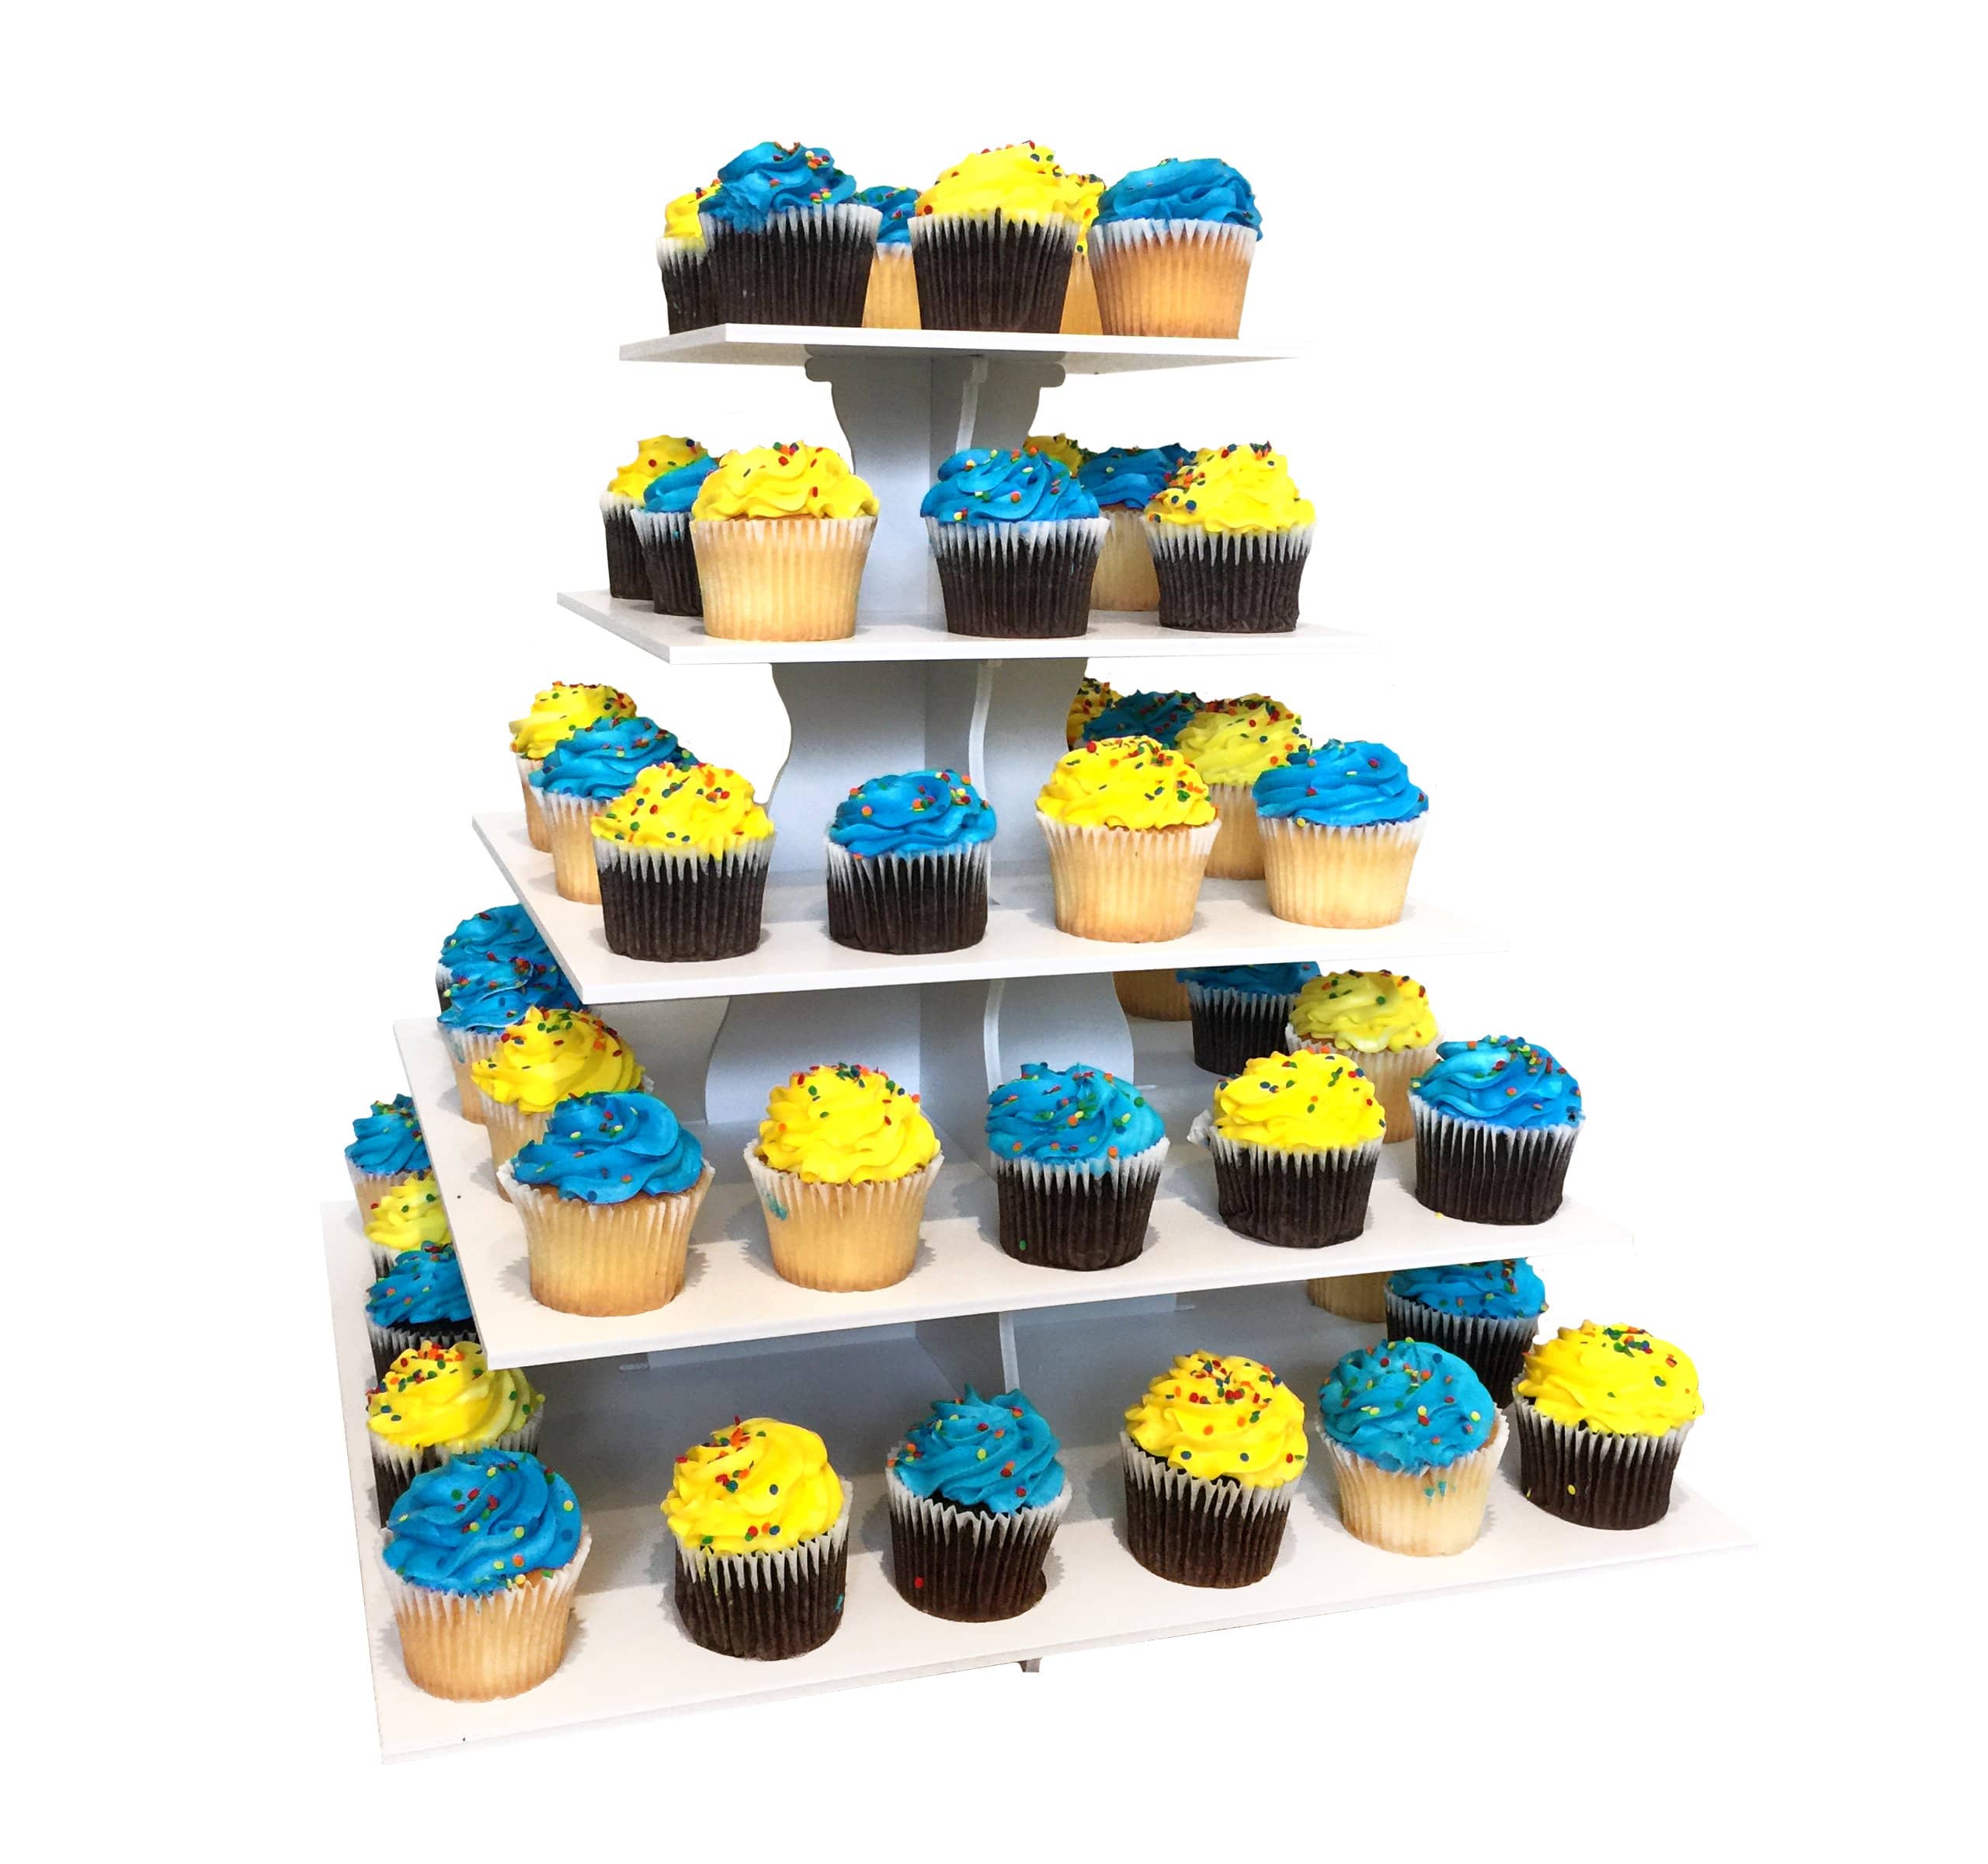 https://cdn.shopify.com/s/files/1/0379/2109/5820/products/Square2in1-Cupcakes_2560x.jpg?v=1661891091